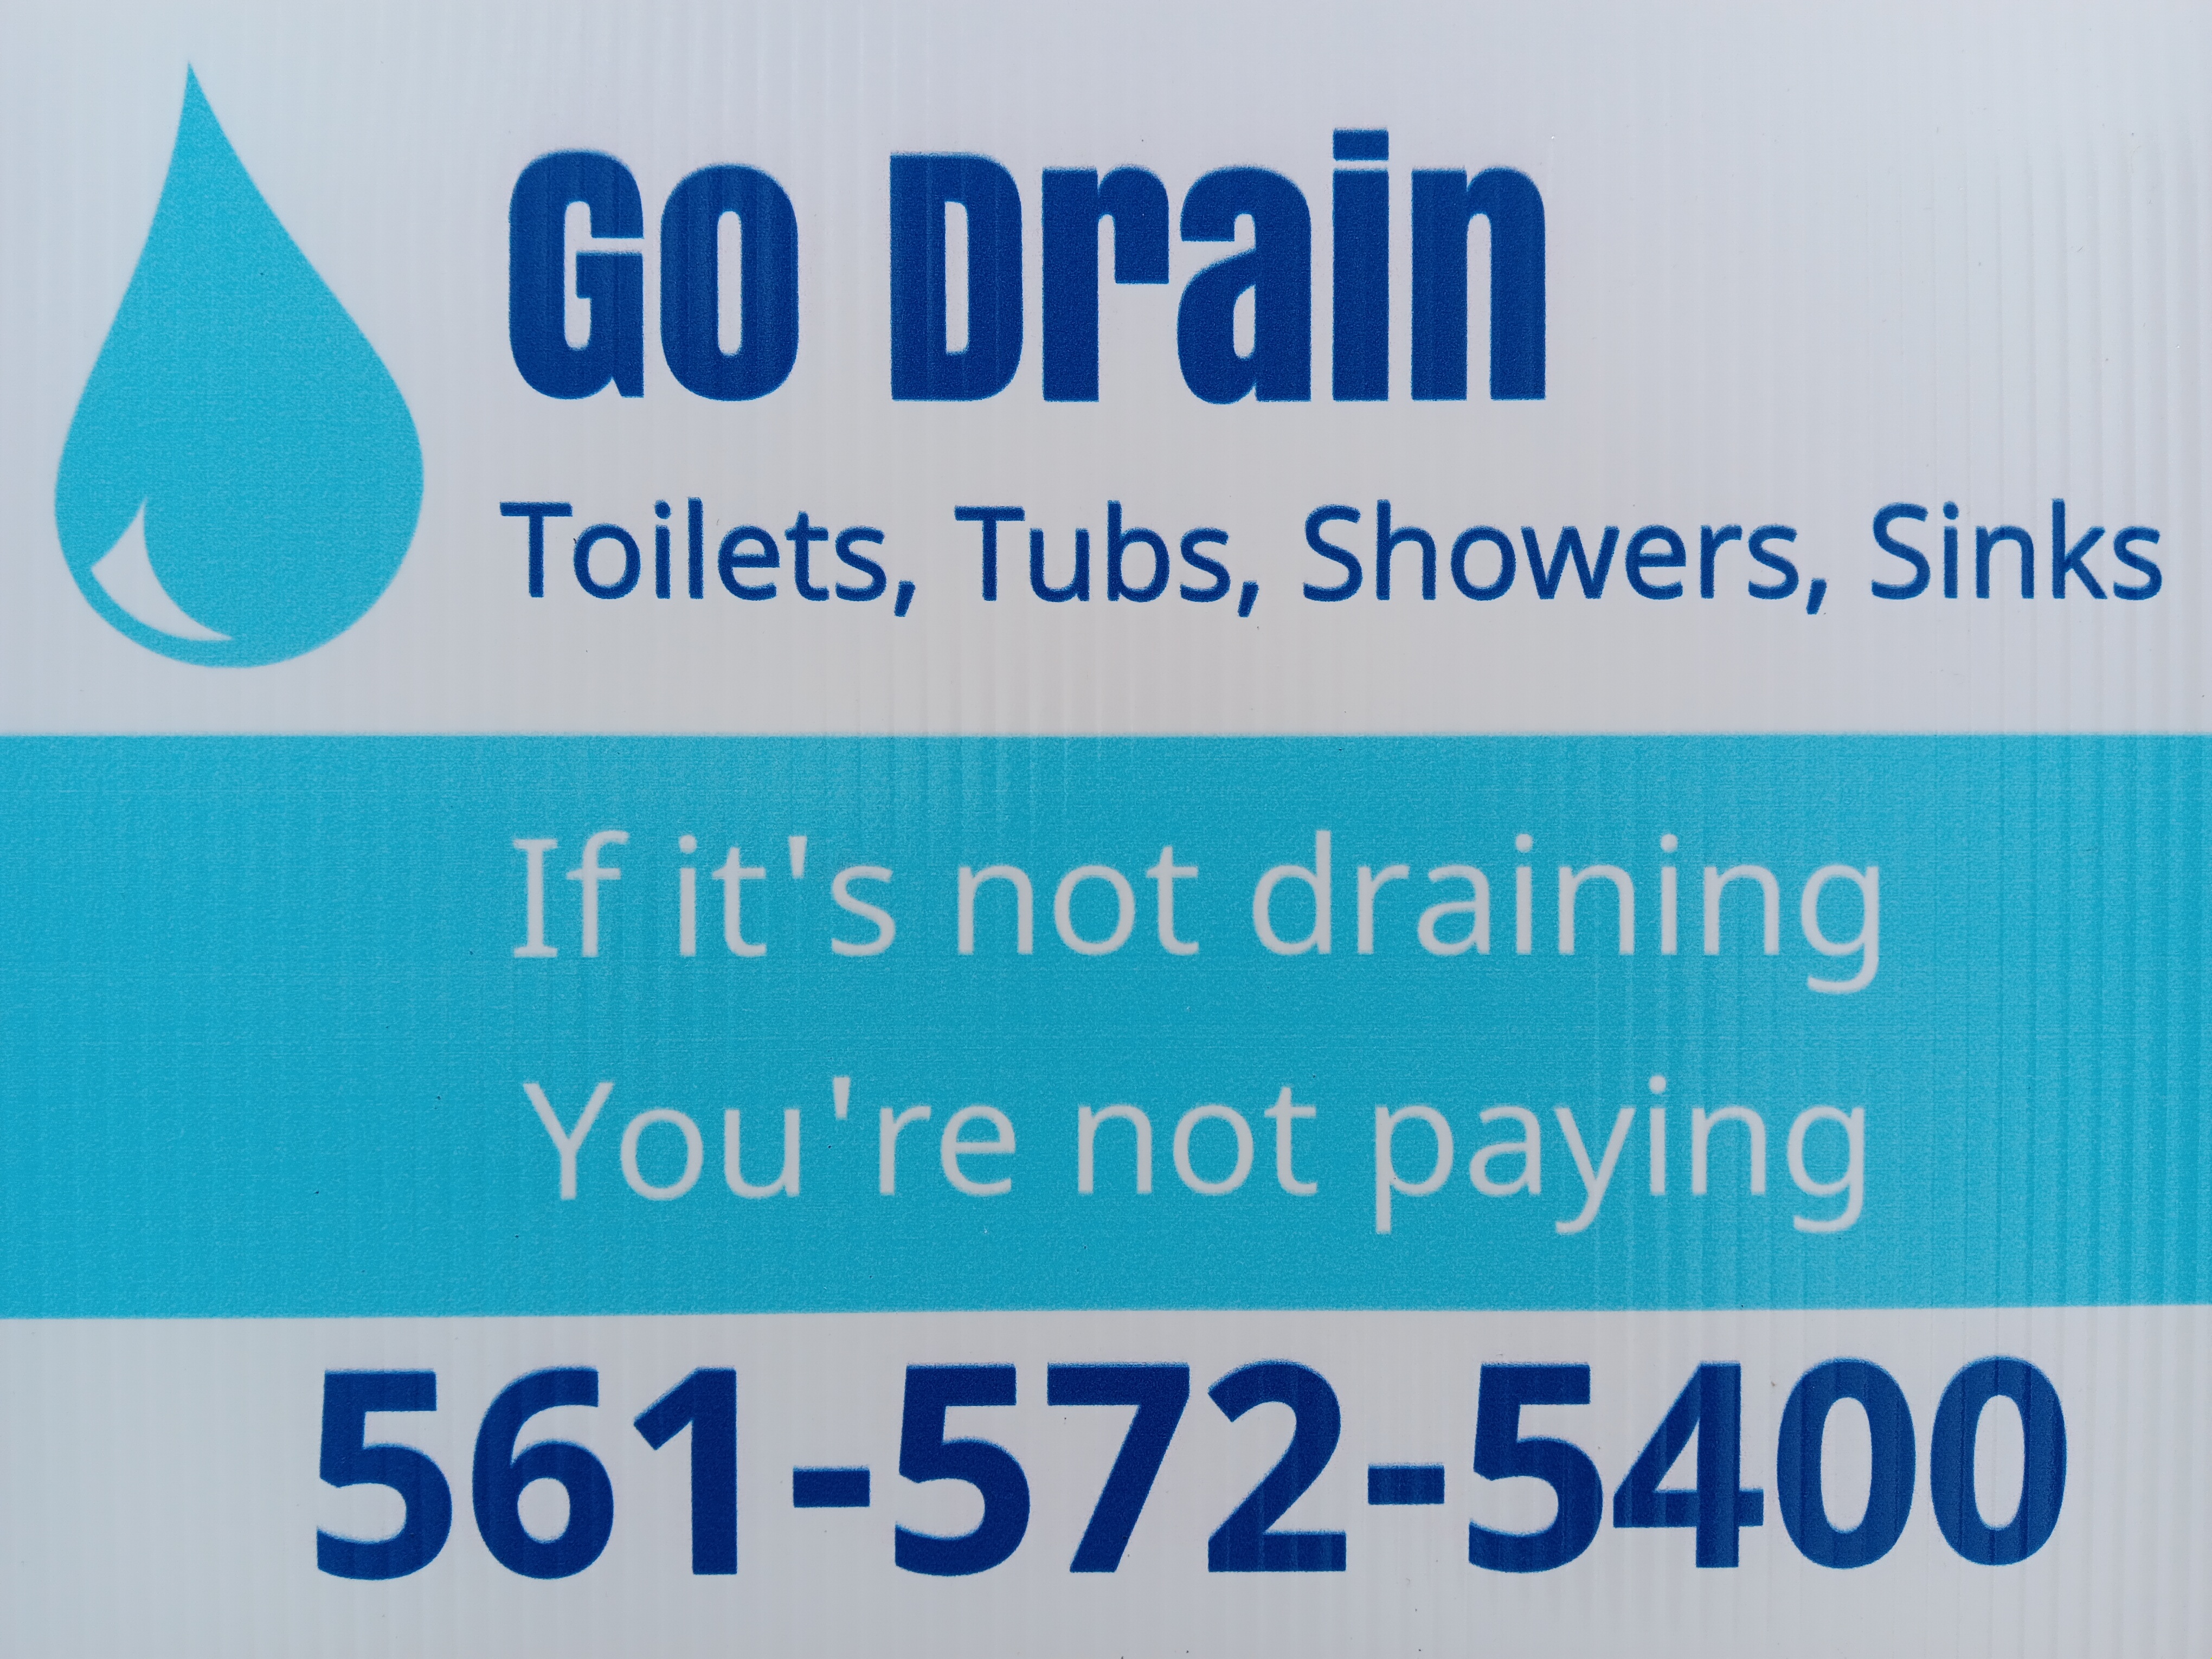 If it's not draining... You're not paying!